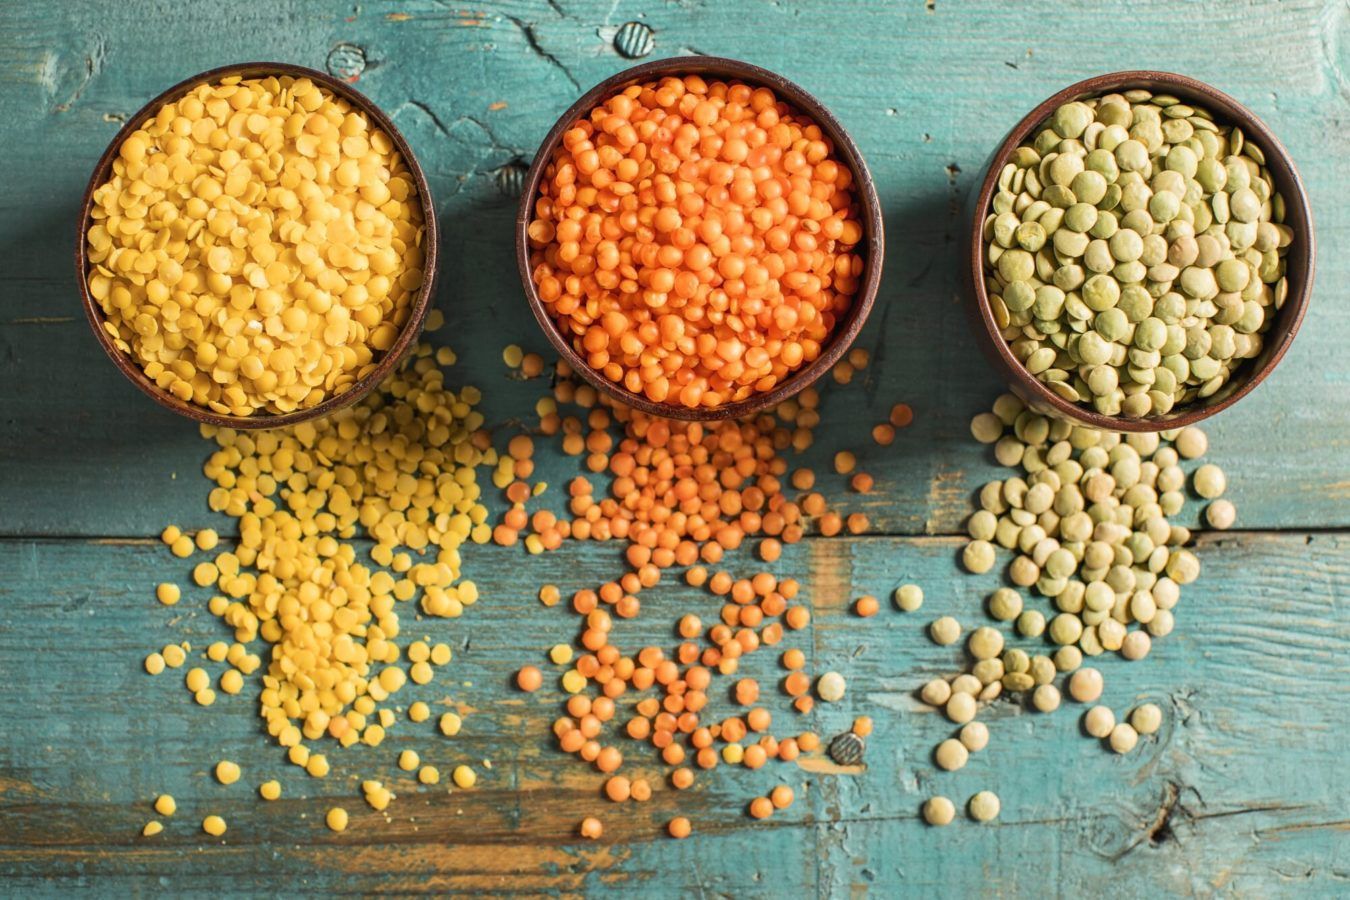 Why lentils are just about the healthiest food you can eat